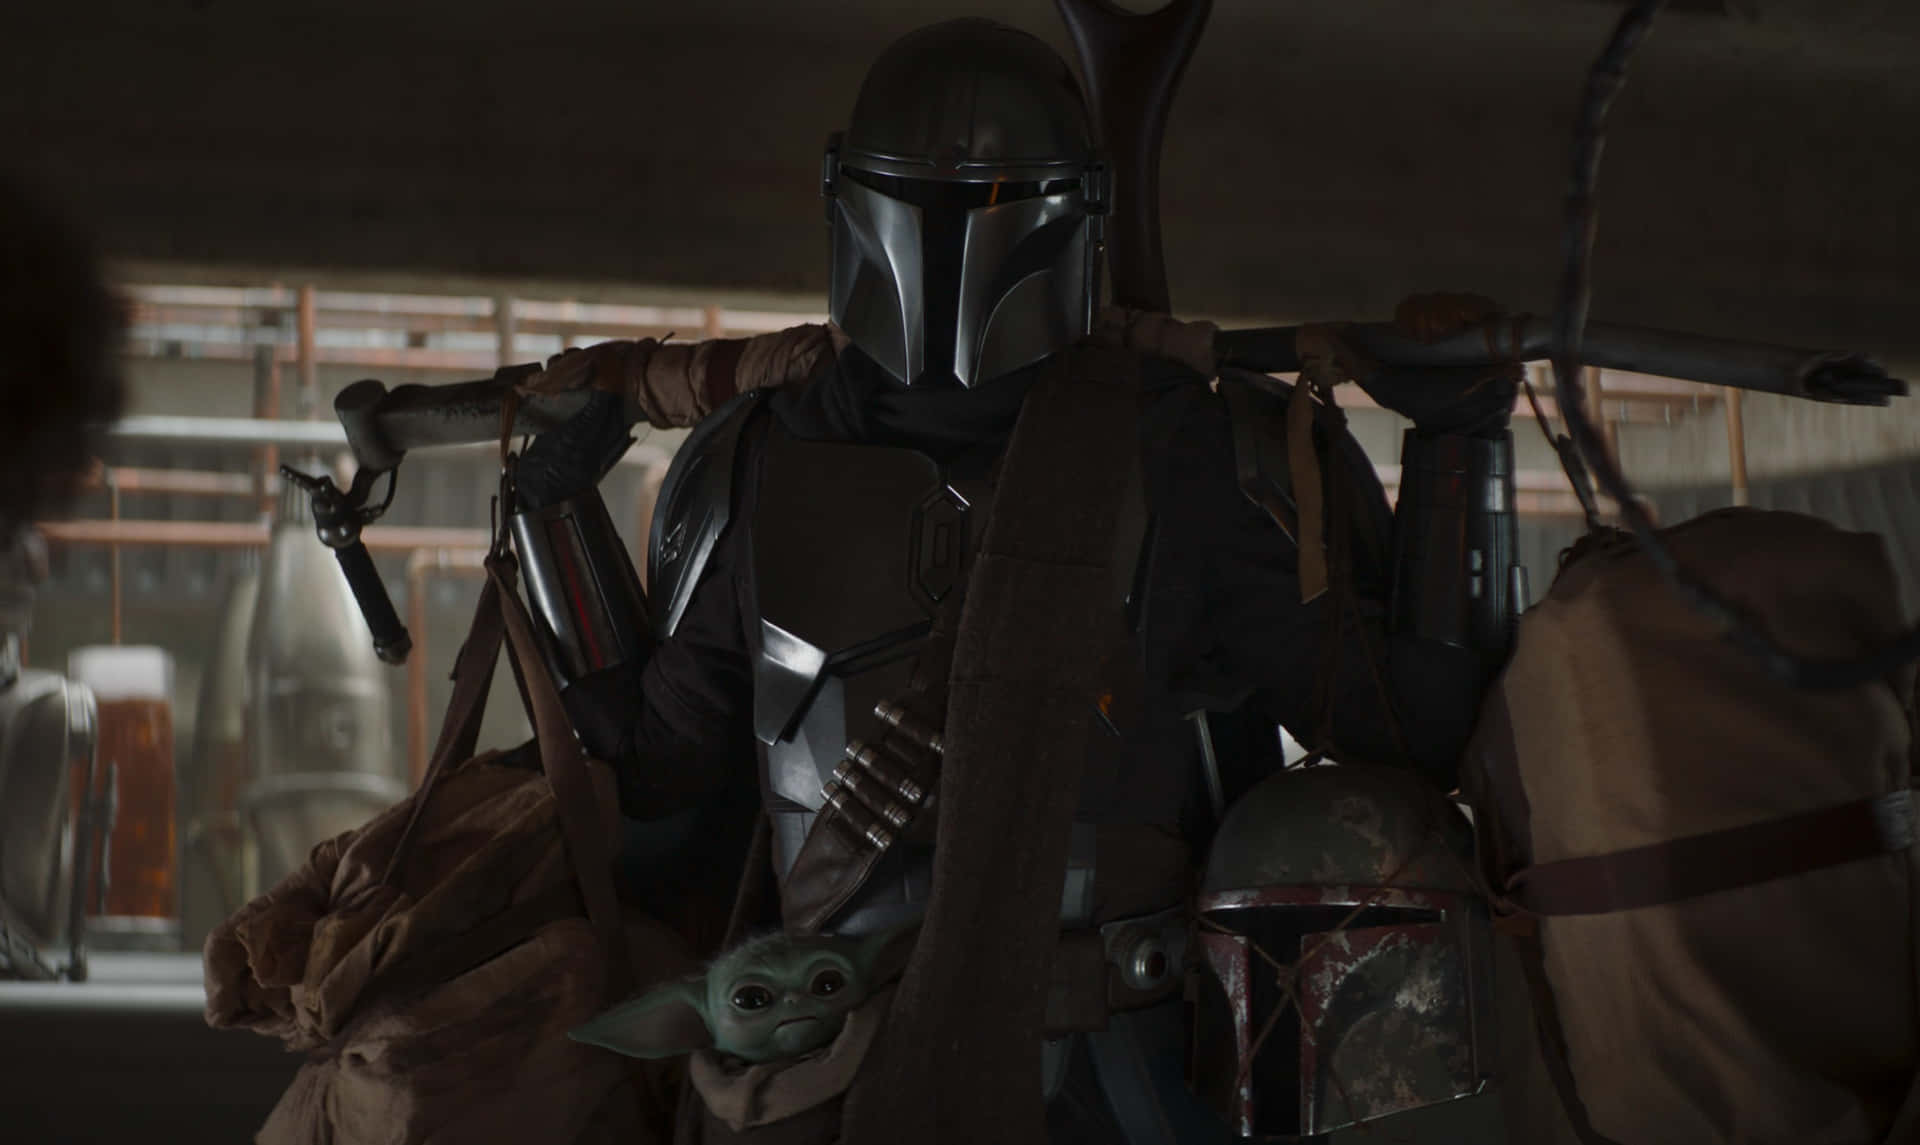 Defending his people, the Mandalorian stands ready for battle.